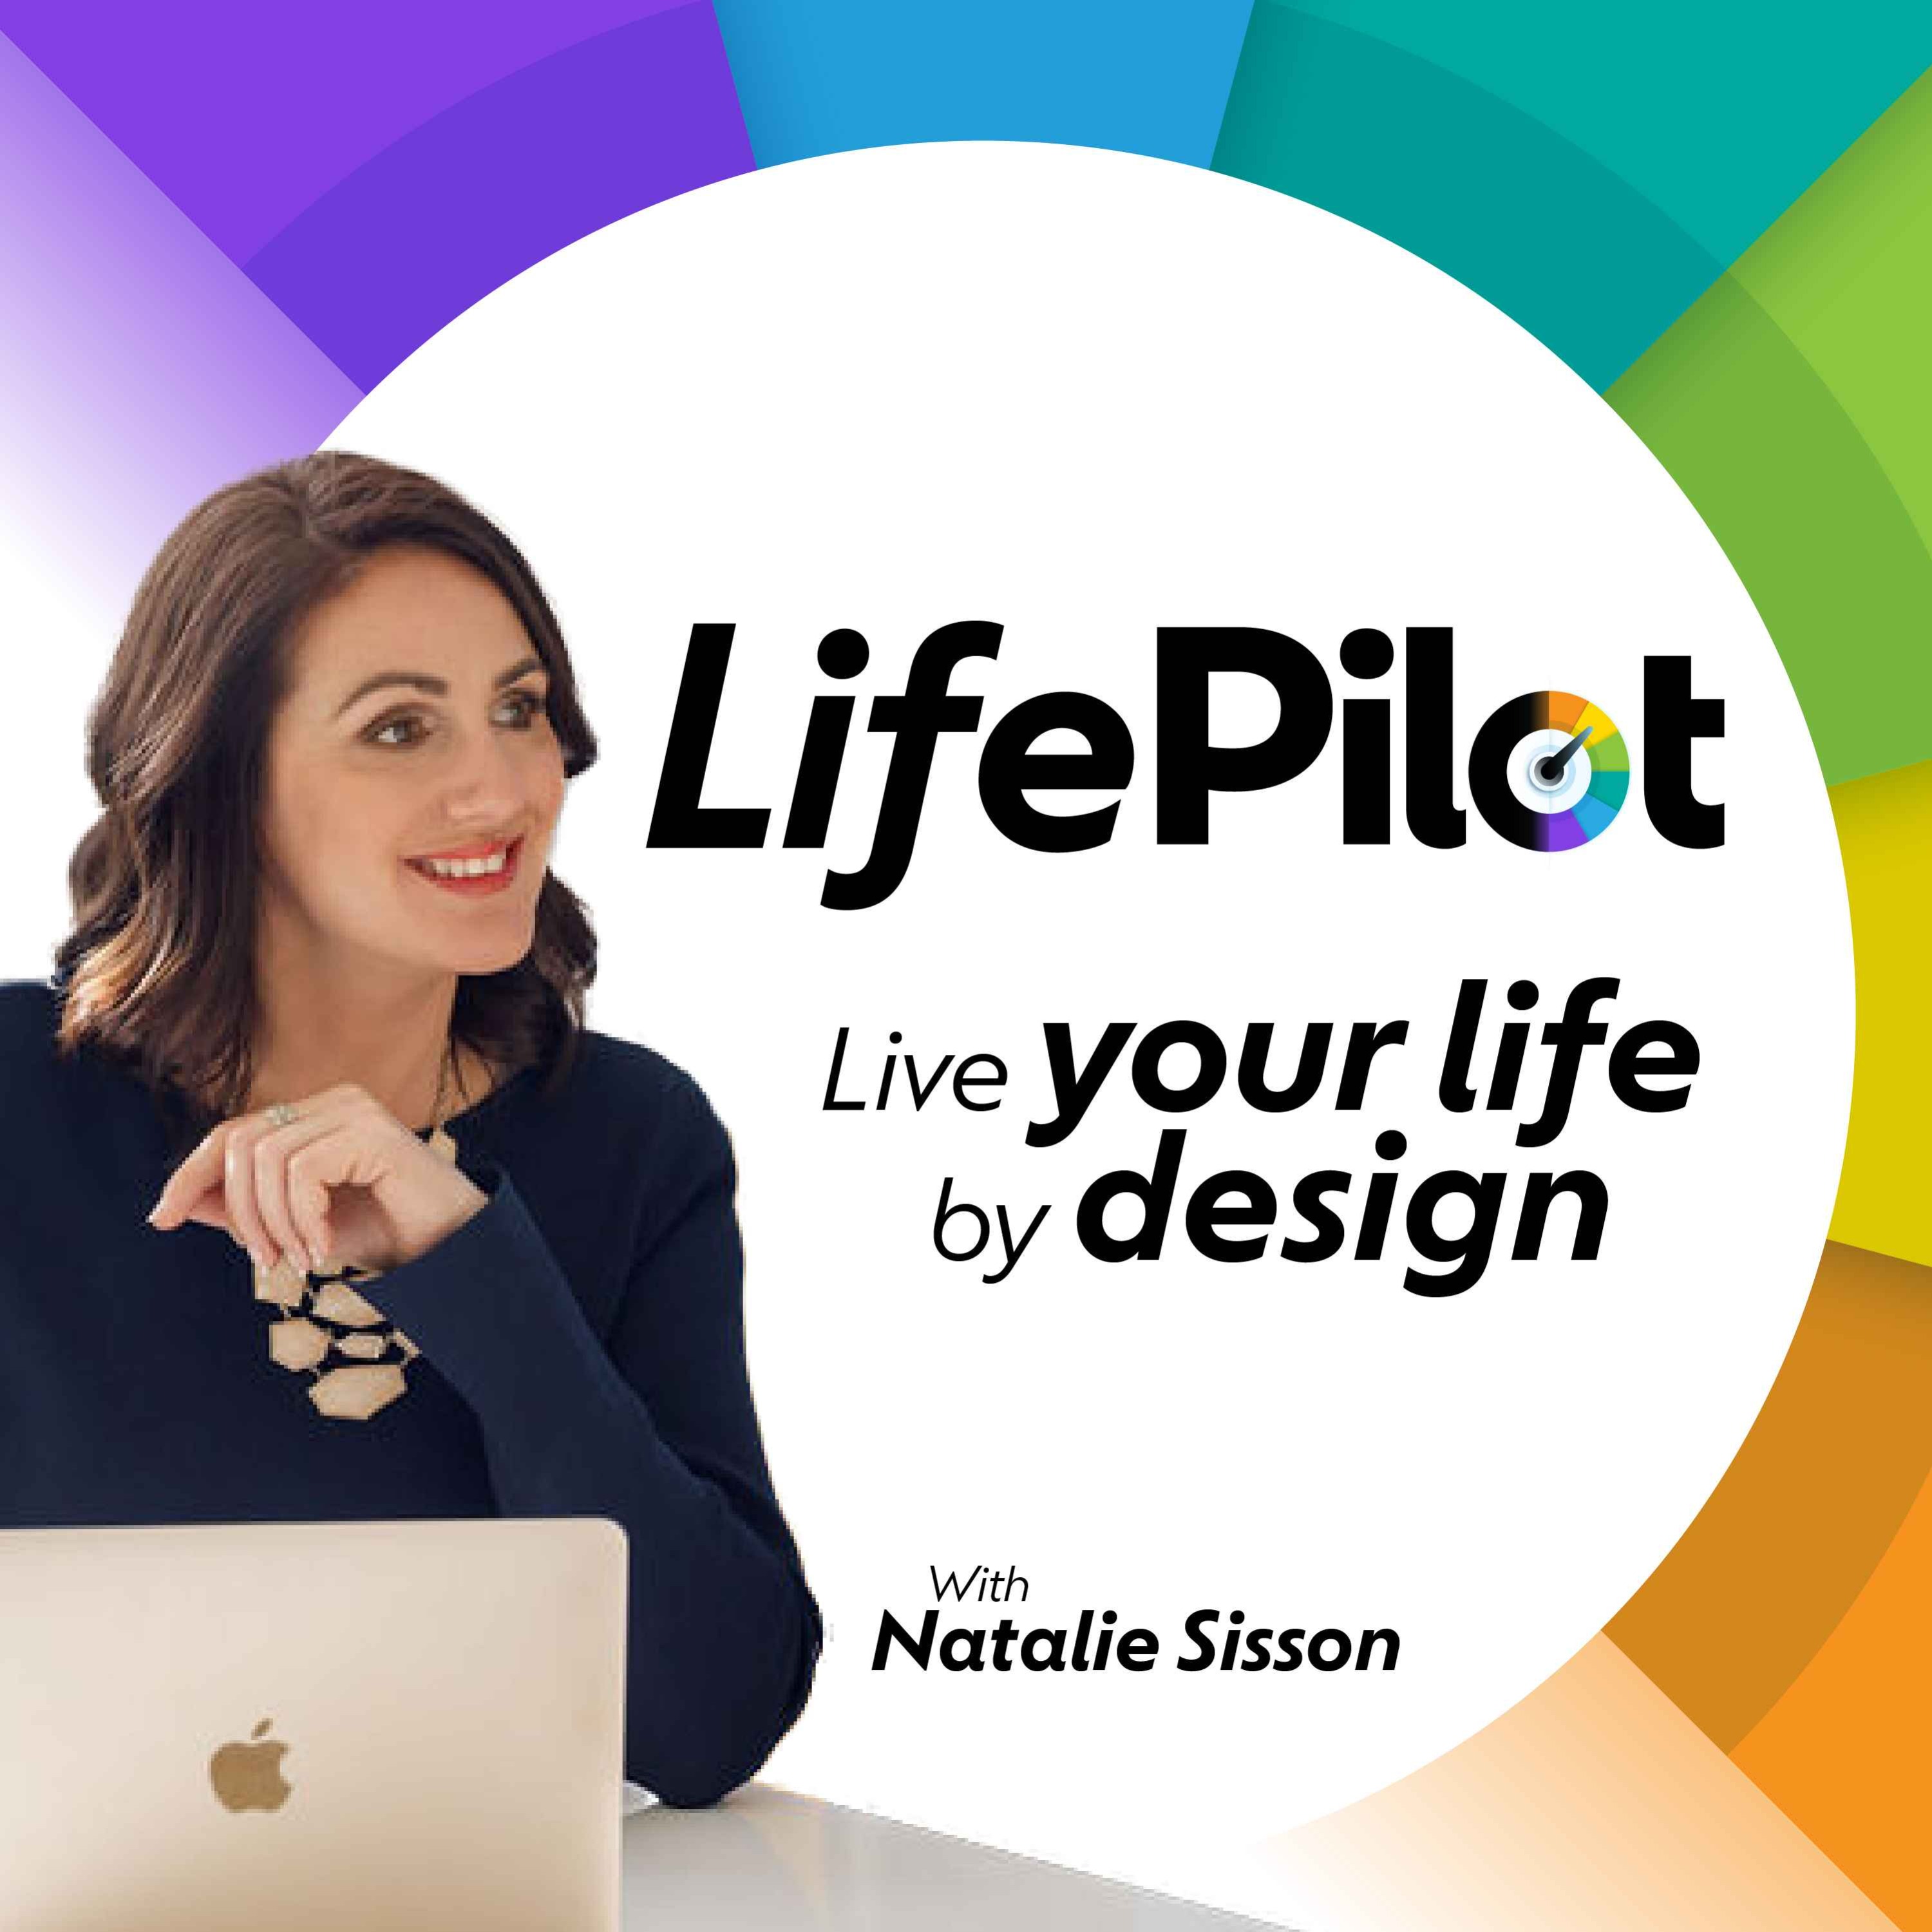 LifePilot: Live your life by design